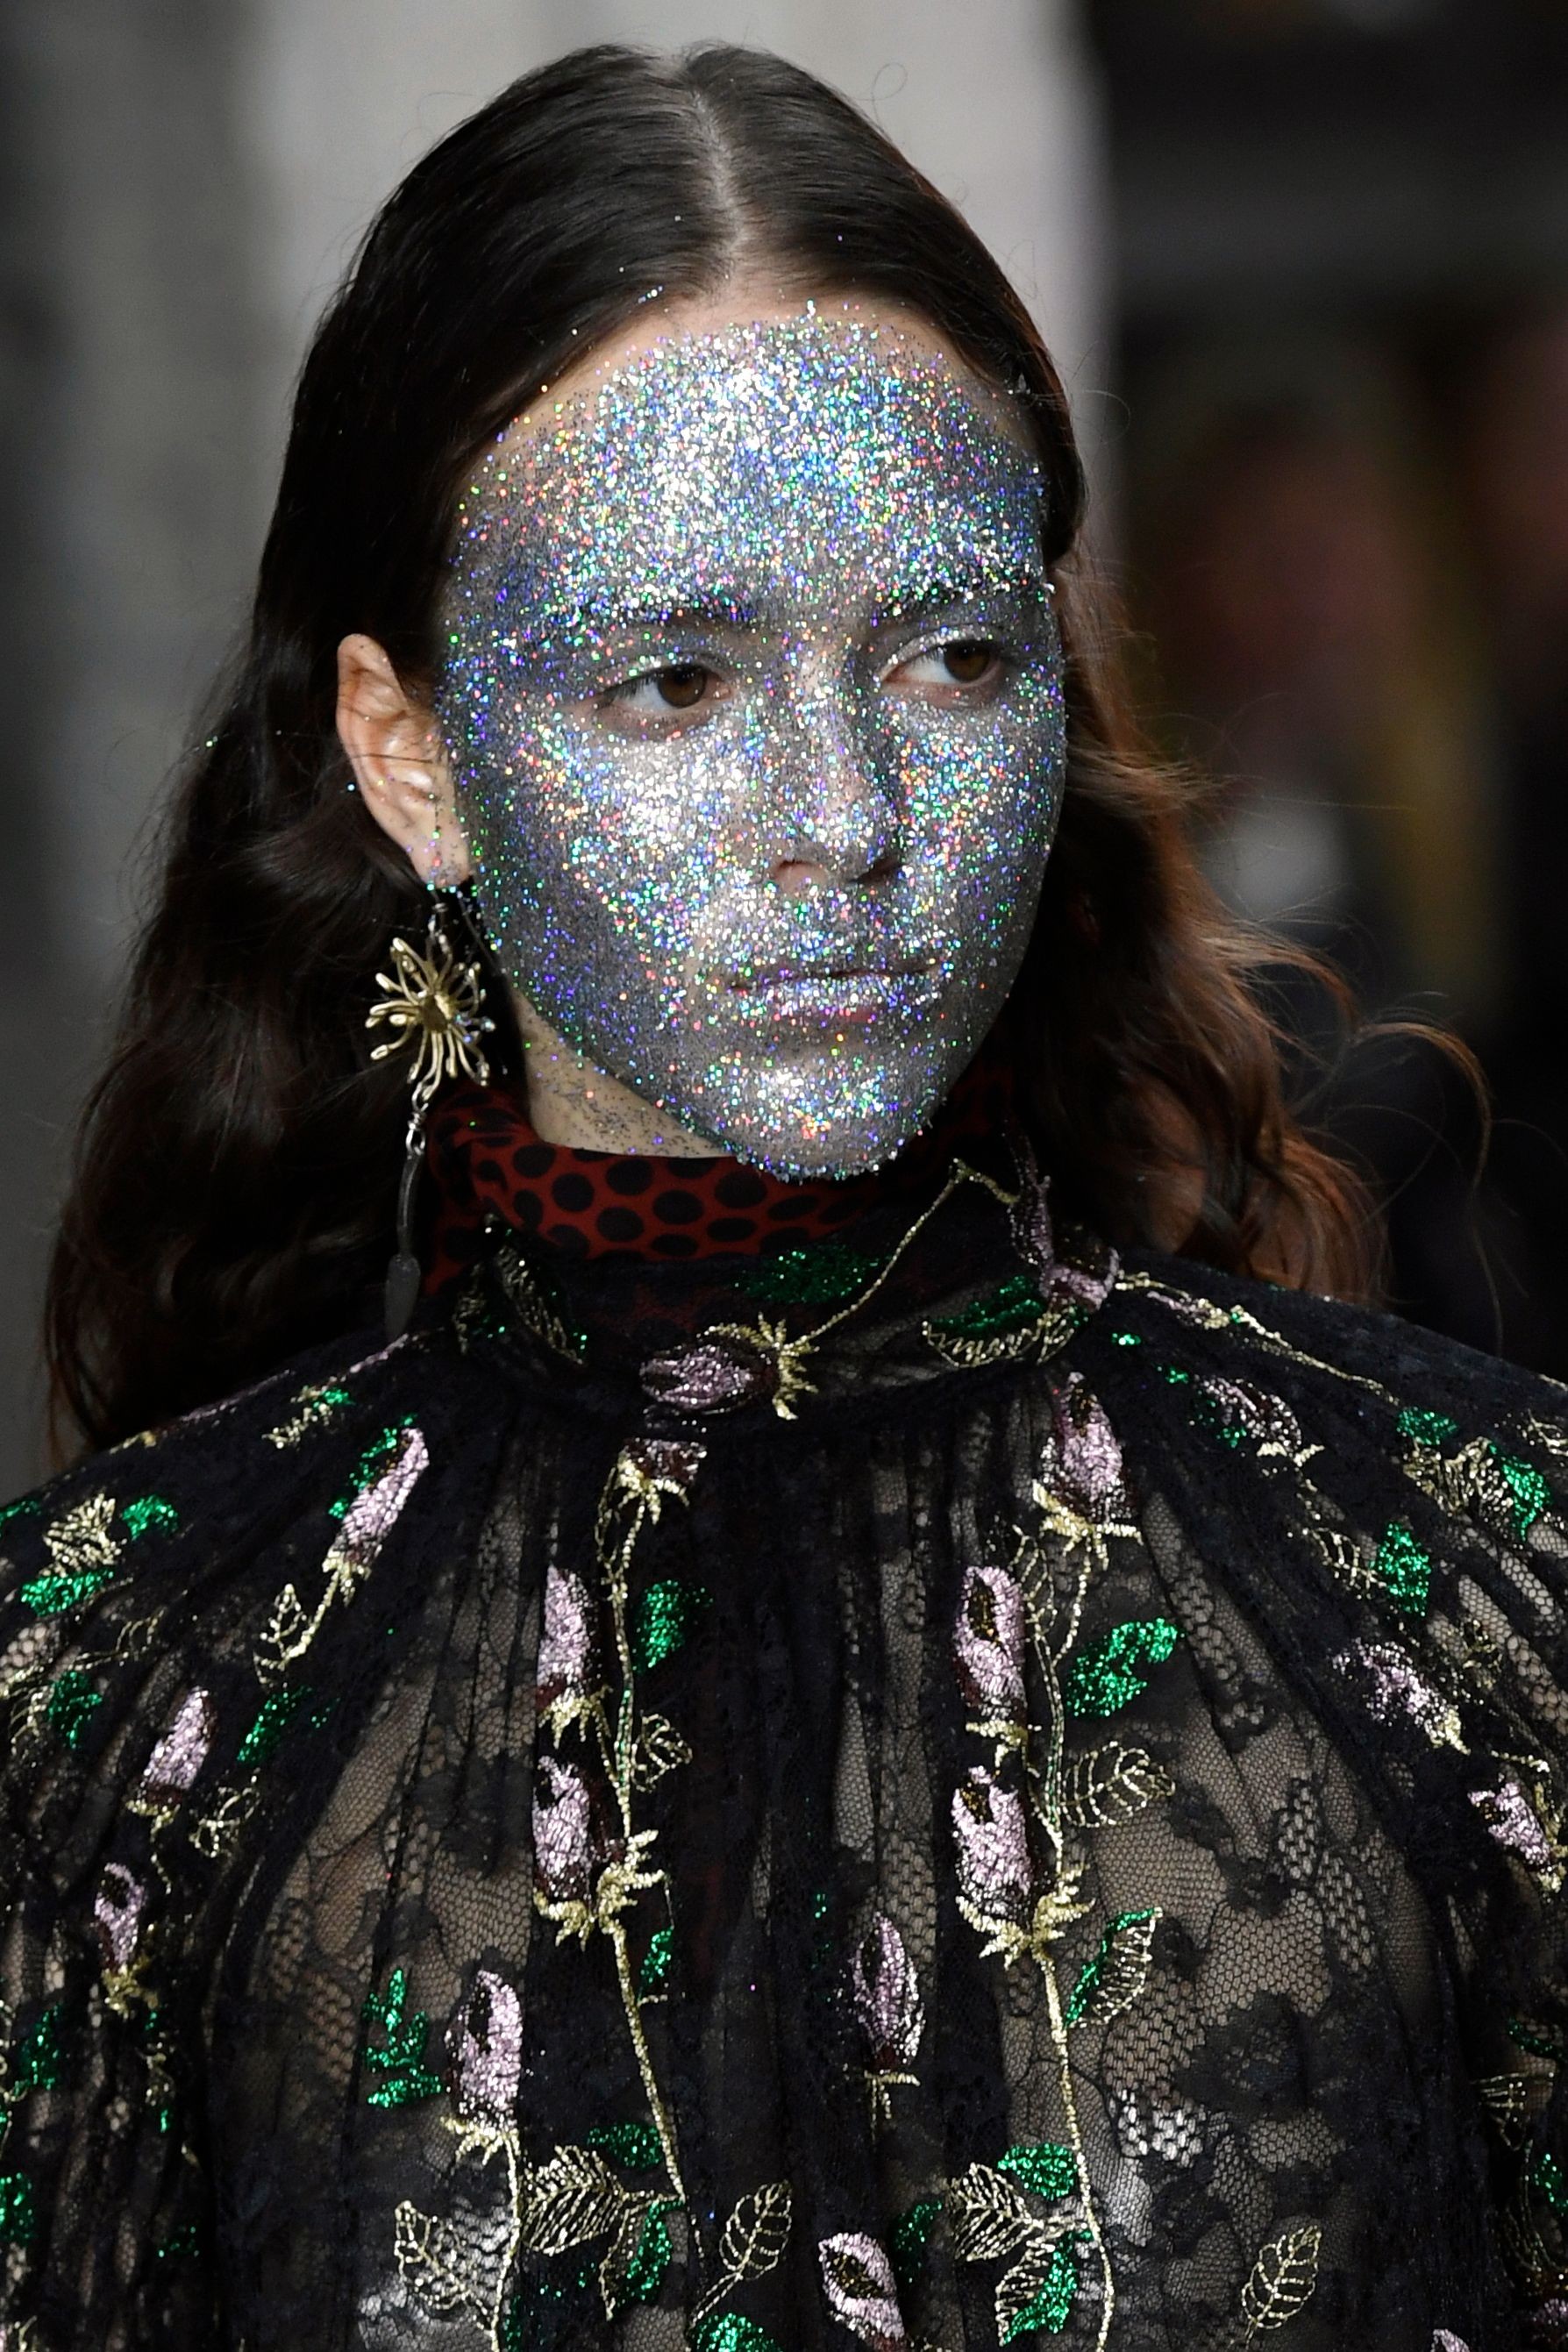 A model with glitter make-up presents a creation by Giambattista Valli at the 2018-2019 autumn winter collection show at Paris Fashion Week on Monday. Photo: AFP